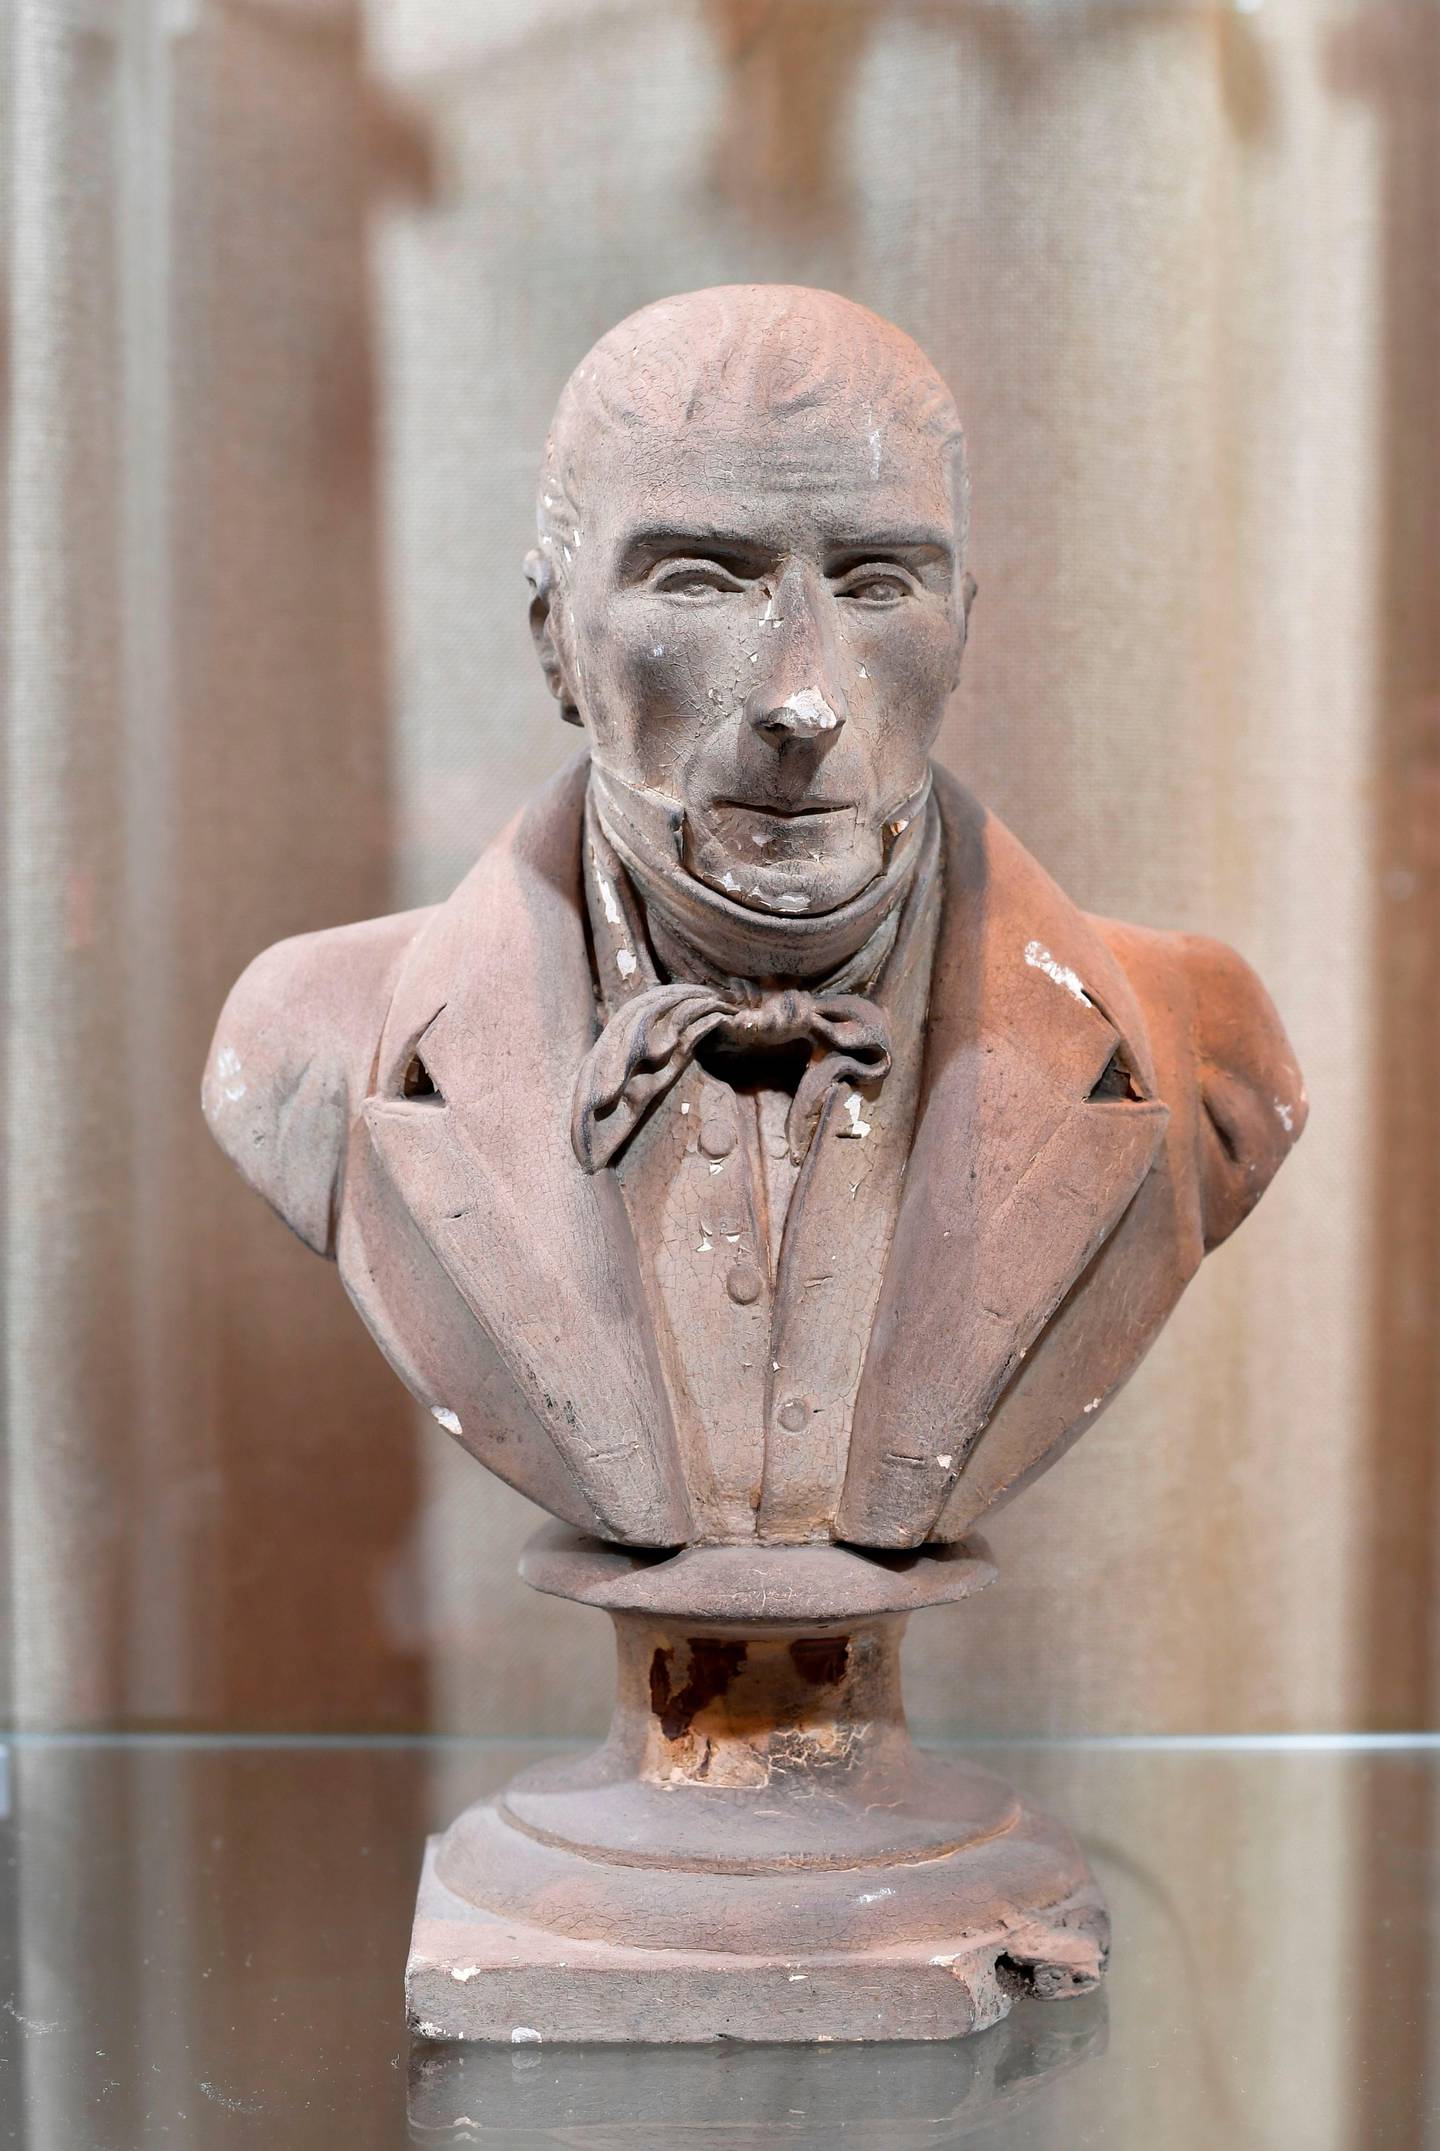 A bust of Mayor Pierre David is pictured at the city's Museum of Fine Arts on September 3, 2020, in Vervier. - An ornate fountain in Verviers, eastern Belgium, has given up an object it held for more than a century: the heart of the city's first mayor.The organ, sealed in a jar of alcohol inside a small zinc casket, was found during renovation of the fountain. The casket is now on show in the city's Museum of Fine Arts. Mayor Pierre David died in 1839, but the fountain named after him was only inaugurated in 1883. An engraving on the casket says it was placed in the monument at the time."The heart of Pierre David was solemnly placed in the monument on 25 June 1883". (Photo by JOHN THYS / AFP)